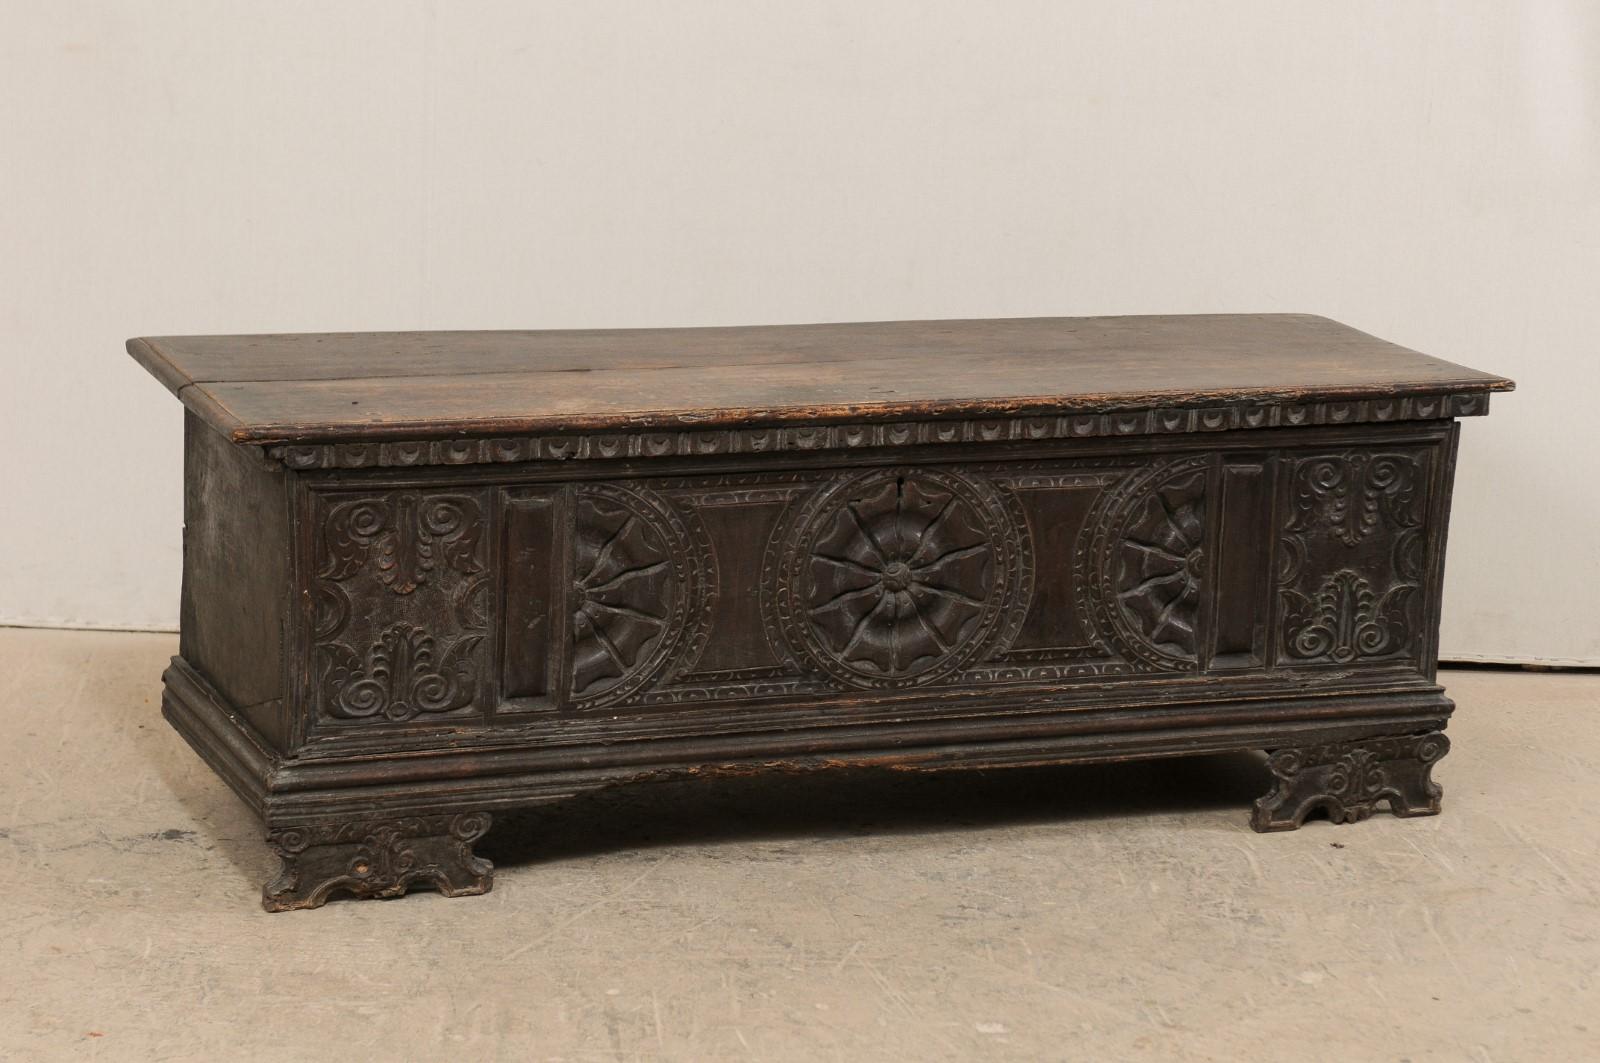 An Italian 18th century nicely carved wooden trunk on raised feet. This antique cassone, or wedding chest, from Italy features an exquisitely hand carved front panel adorn with a center medallion flanked within a pair of halved medallions, and